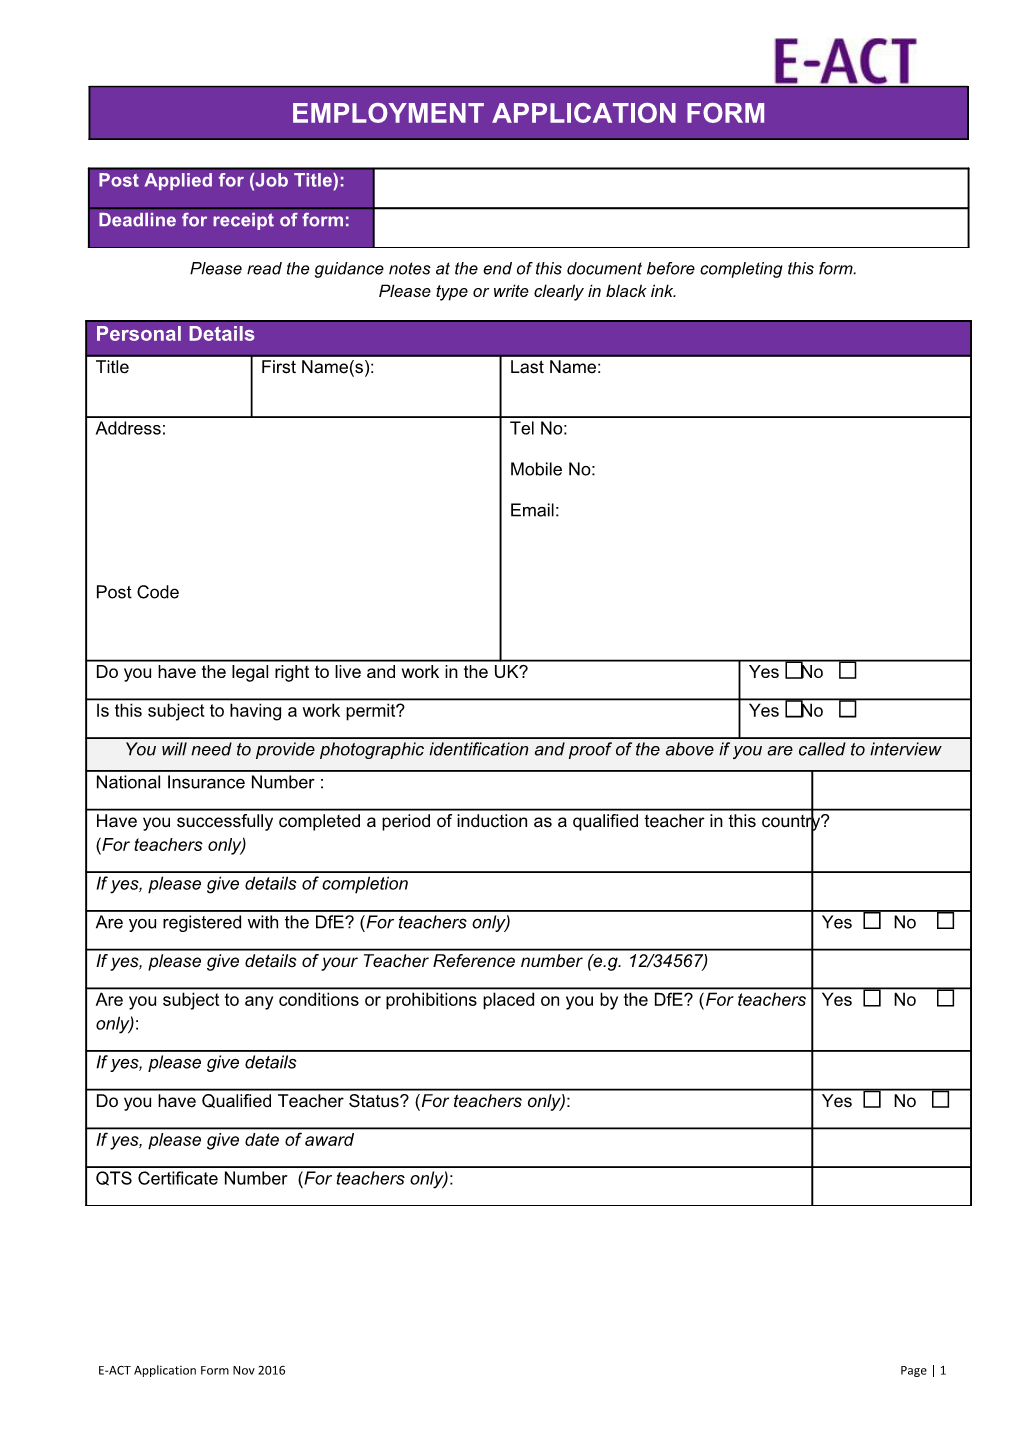 Please Read the Guidance Notes at the End of This Document Before Completing This Form